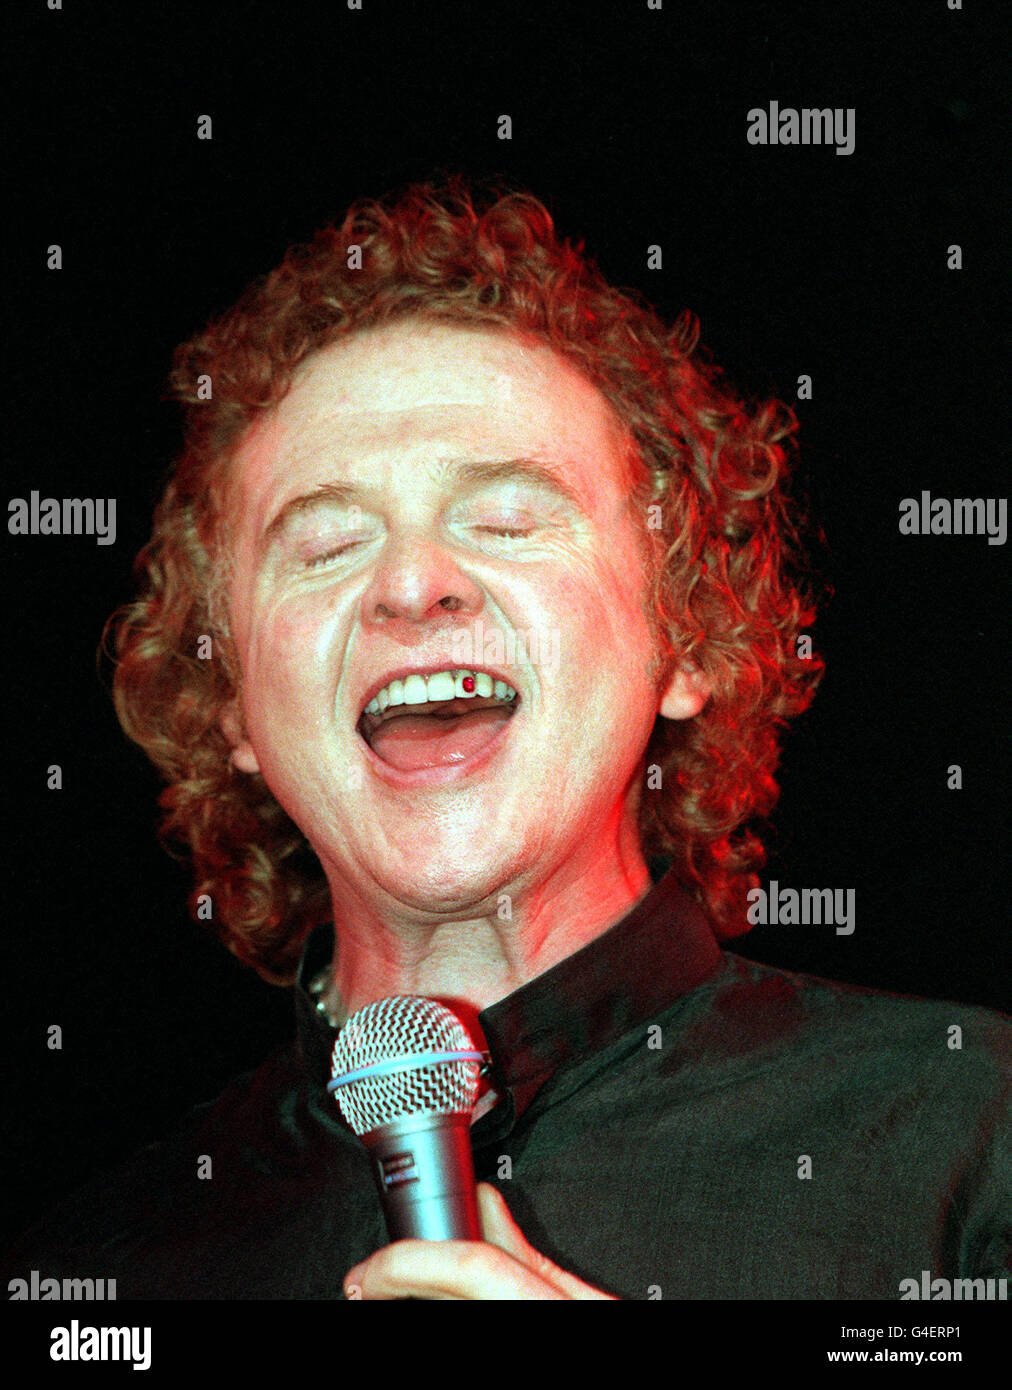 PA NEWS 16/9/98 RED' SINGER MICK HUCKNALL SINGS REHEARSALS THE NIGHT BEFORE THEIR CONCERT AT THE LYCEUM THEATRE, LONDON Stock Photo - Alamy